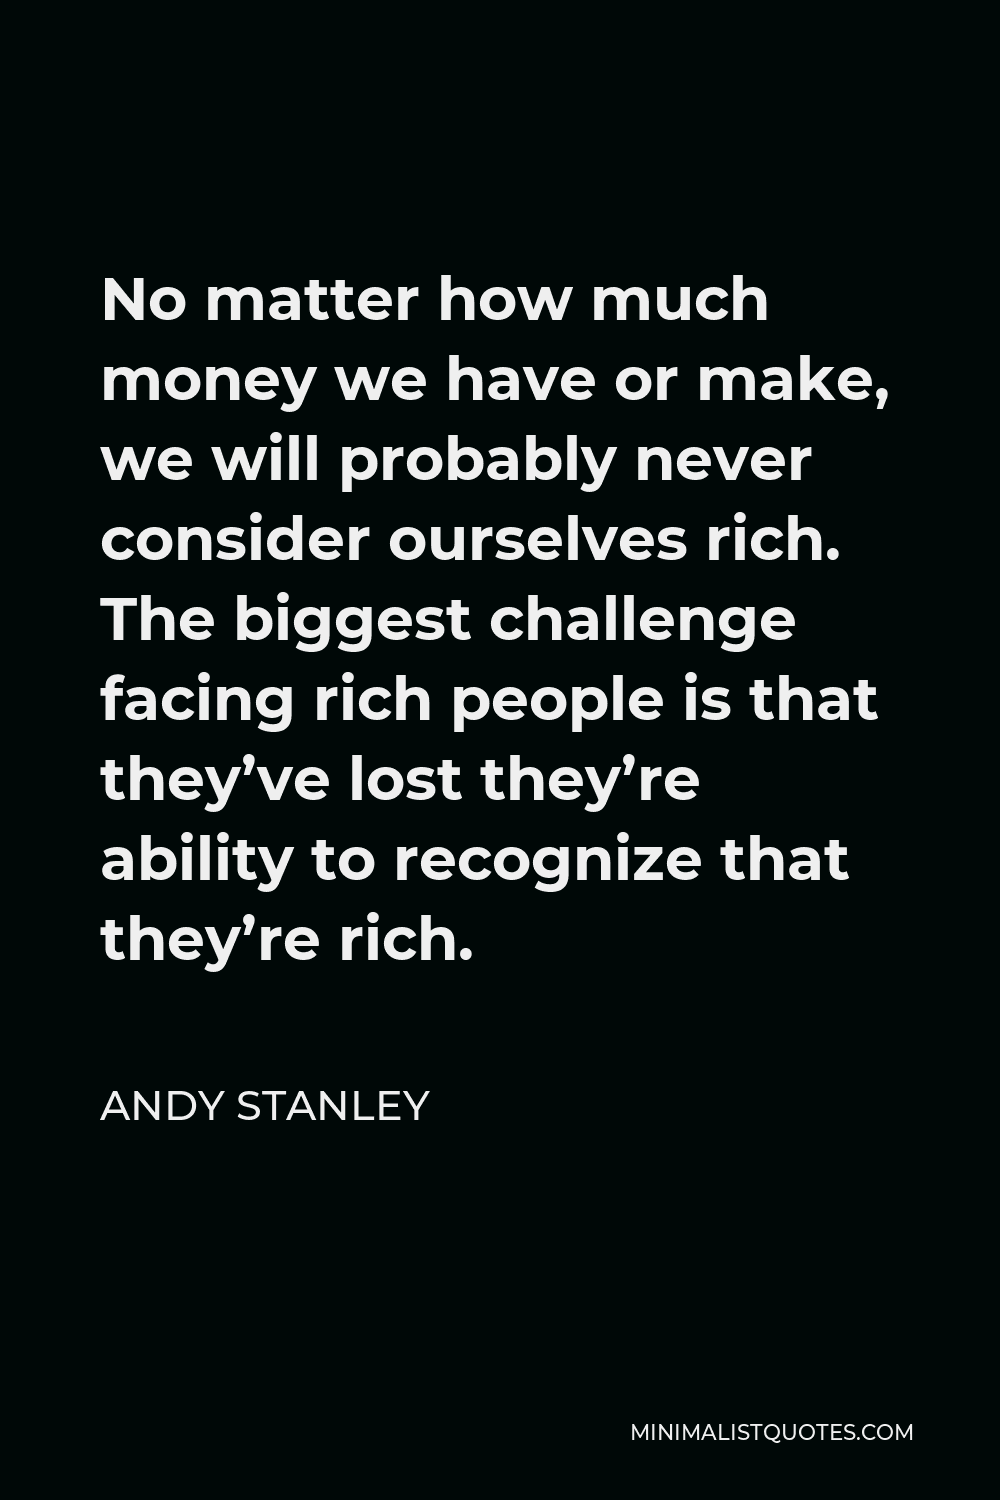 Andy Stanley Quote - No matter how much money we have or make, we will probably never consider ourselves rich. The biggest challenge facing rich people is that they’ve lost they’re ability to recognize that they’re rich.